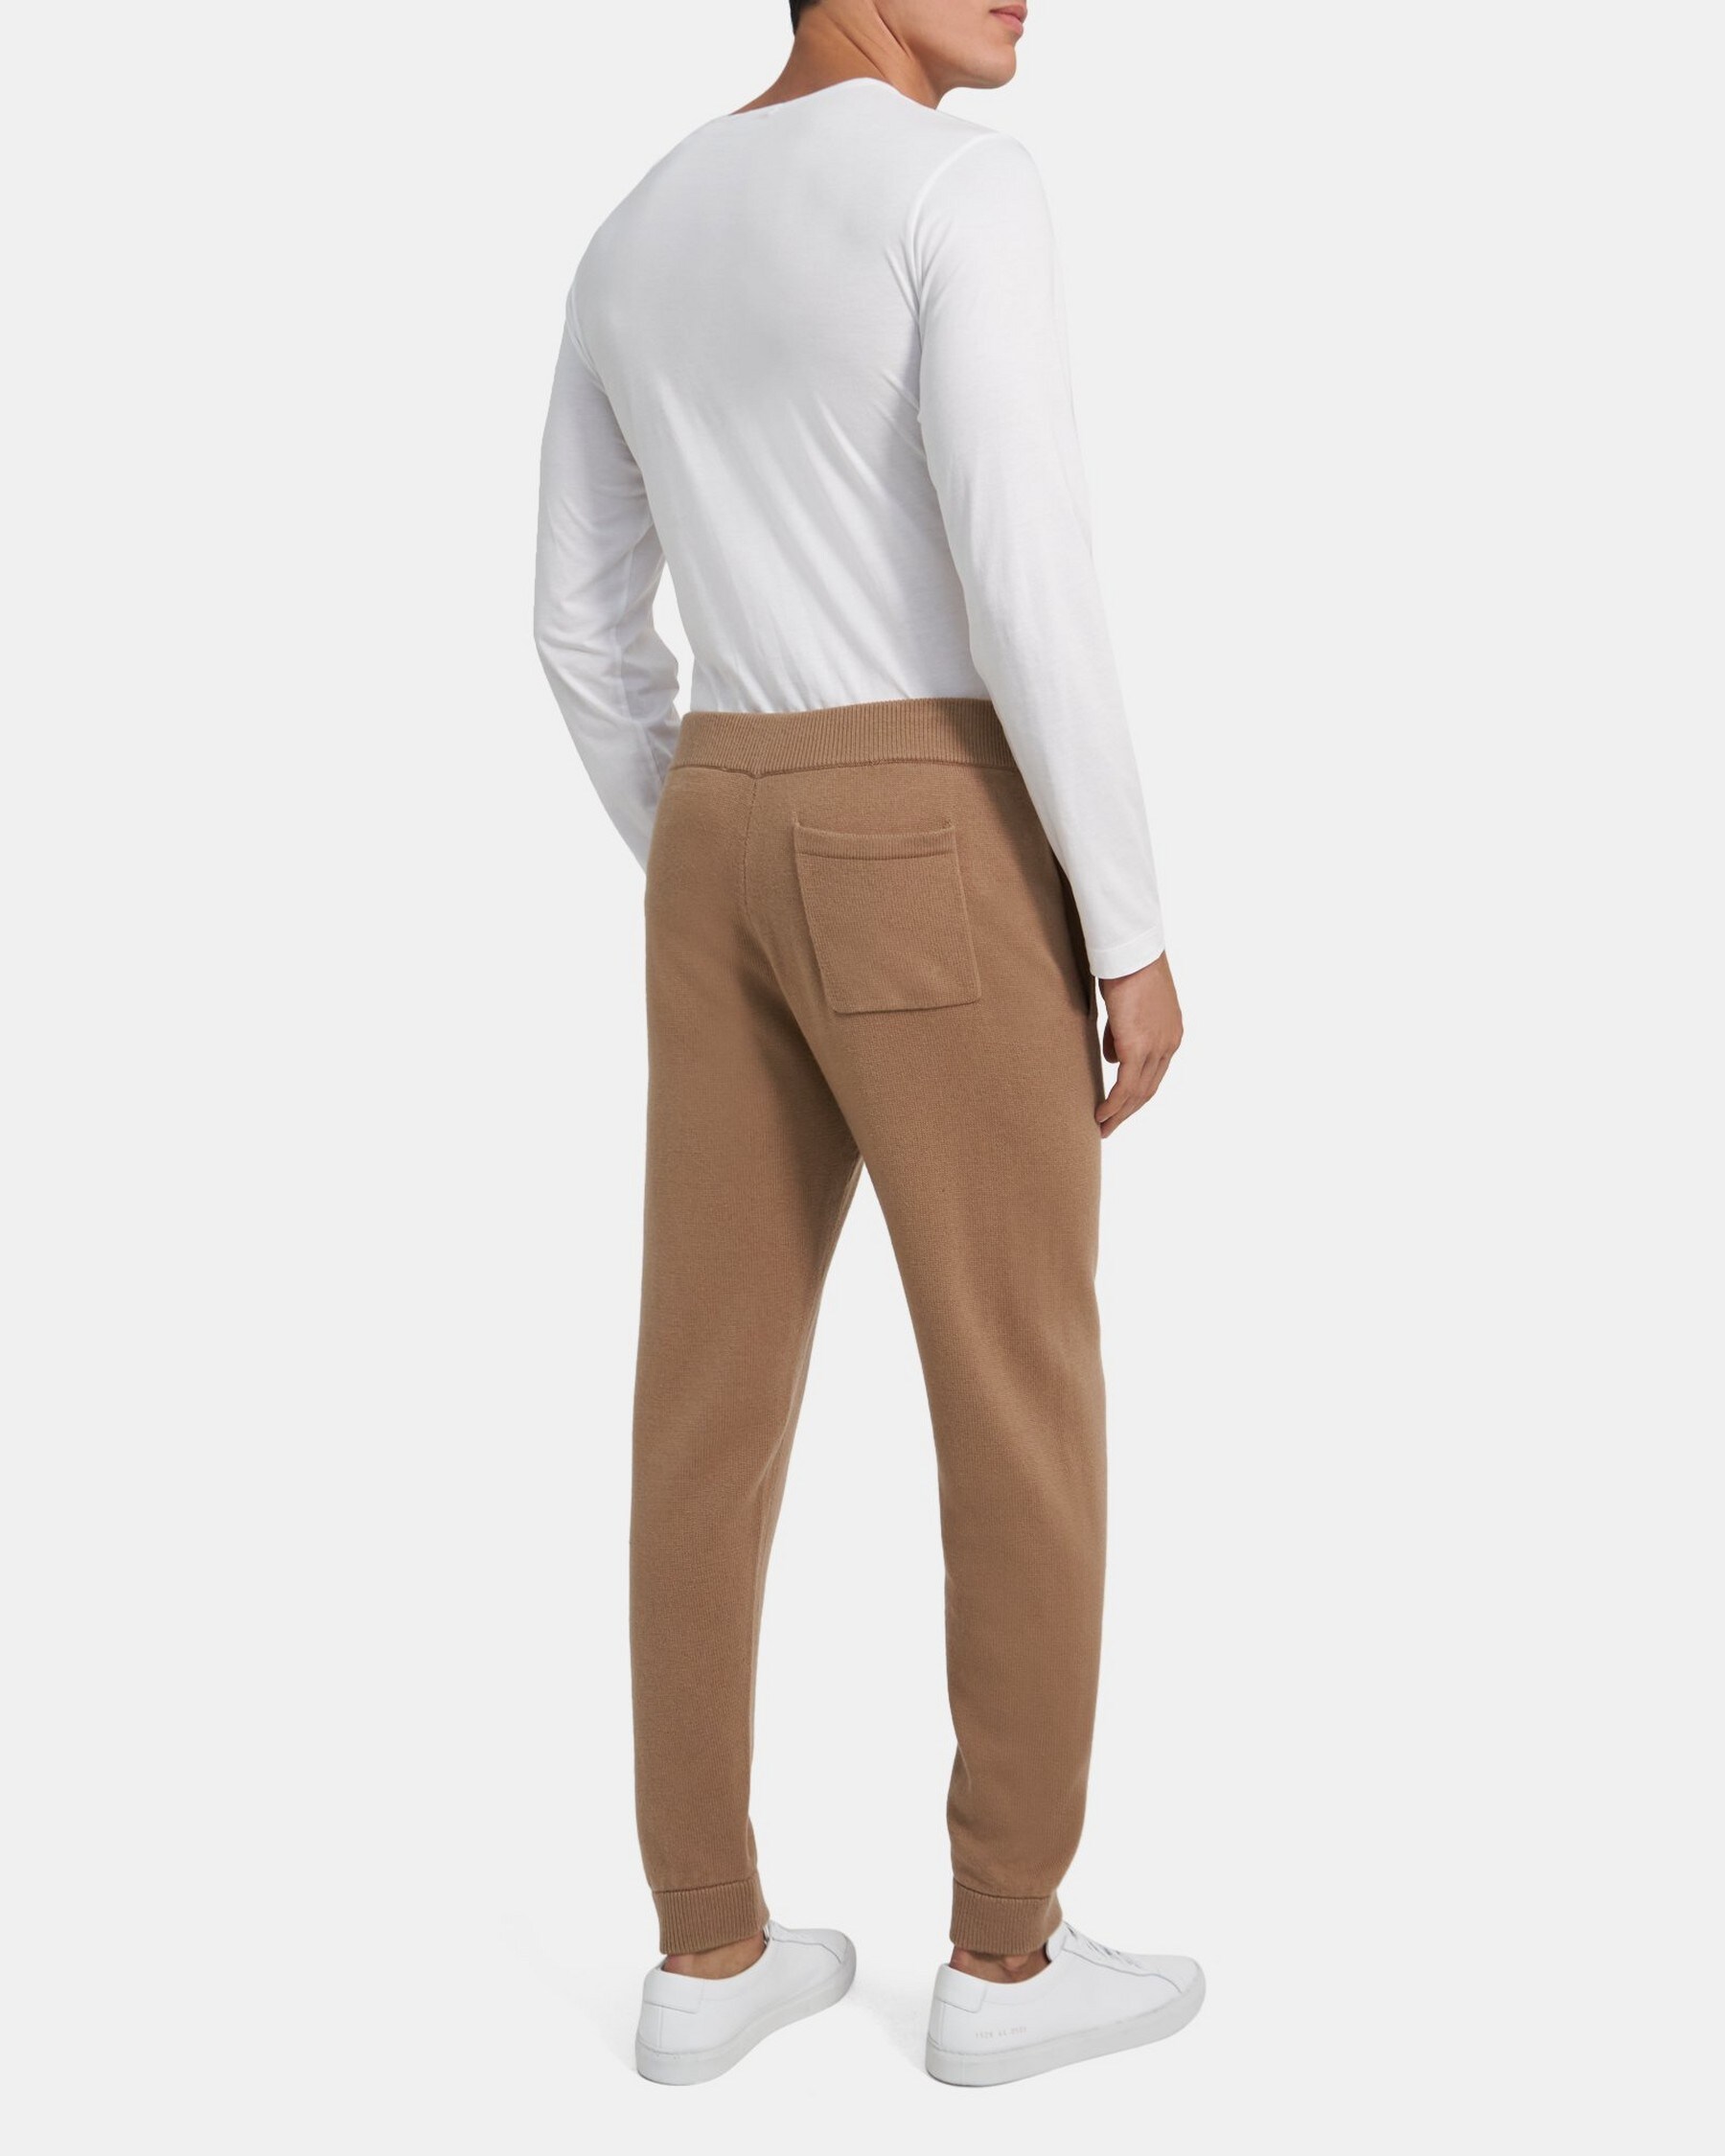 Lounge Pant in Wool-Cashmere